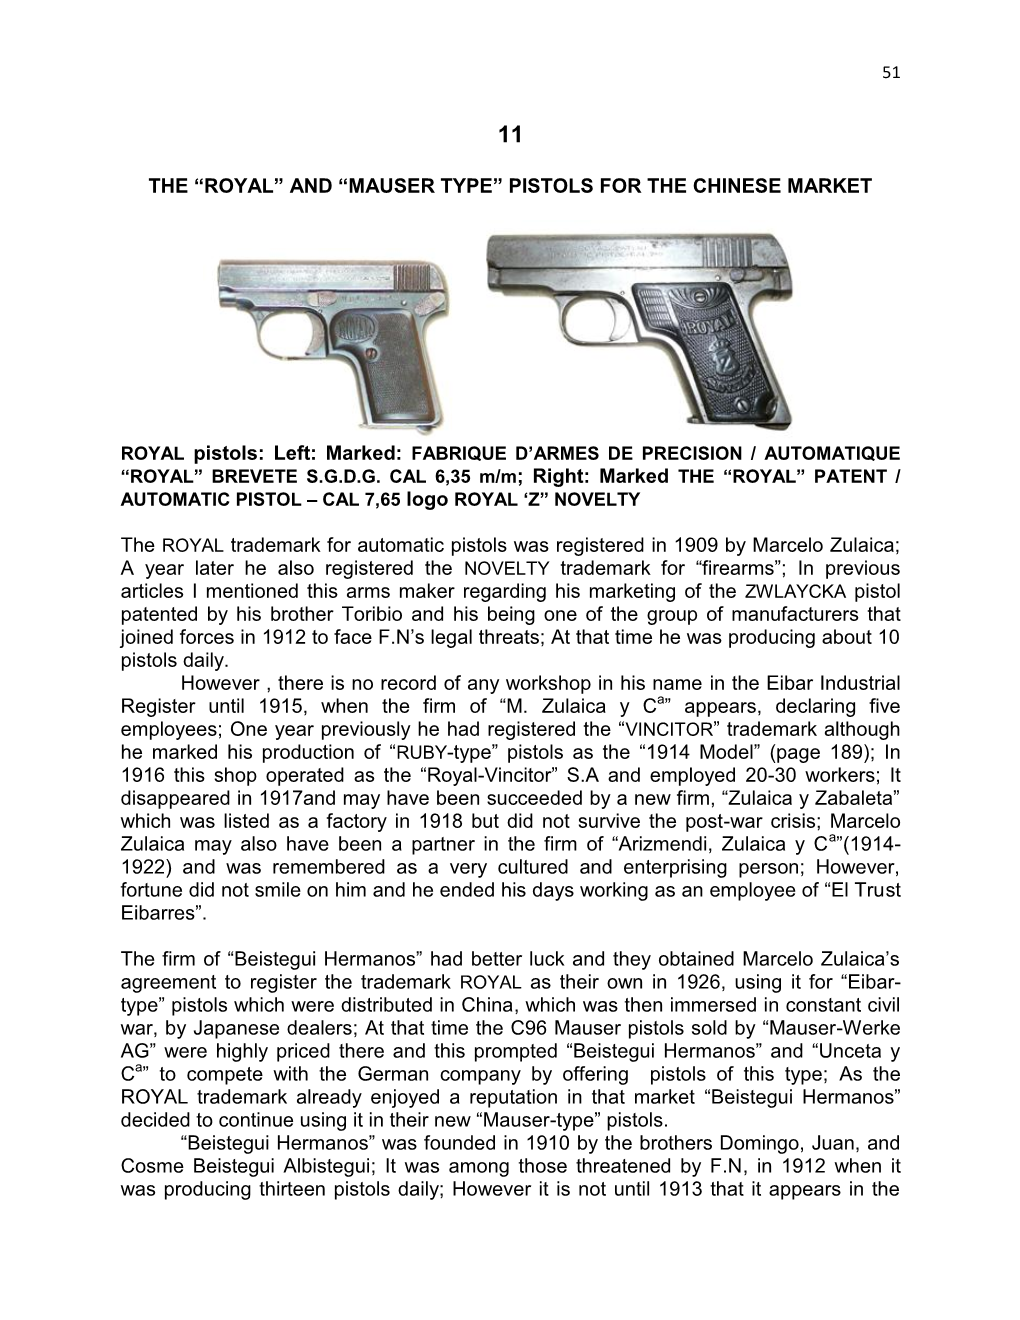 The “Royal” and “Mauser Type” Pistols for the Chinese Market